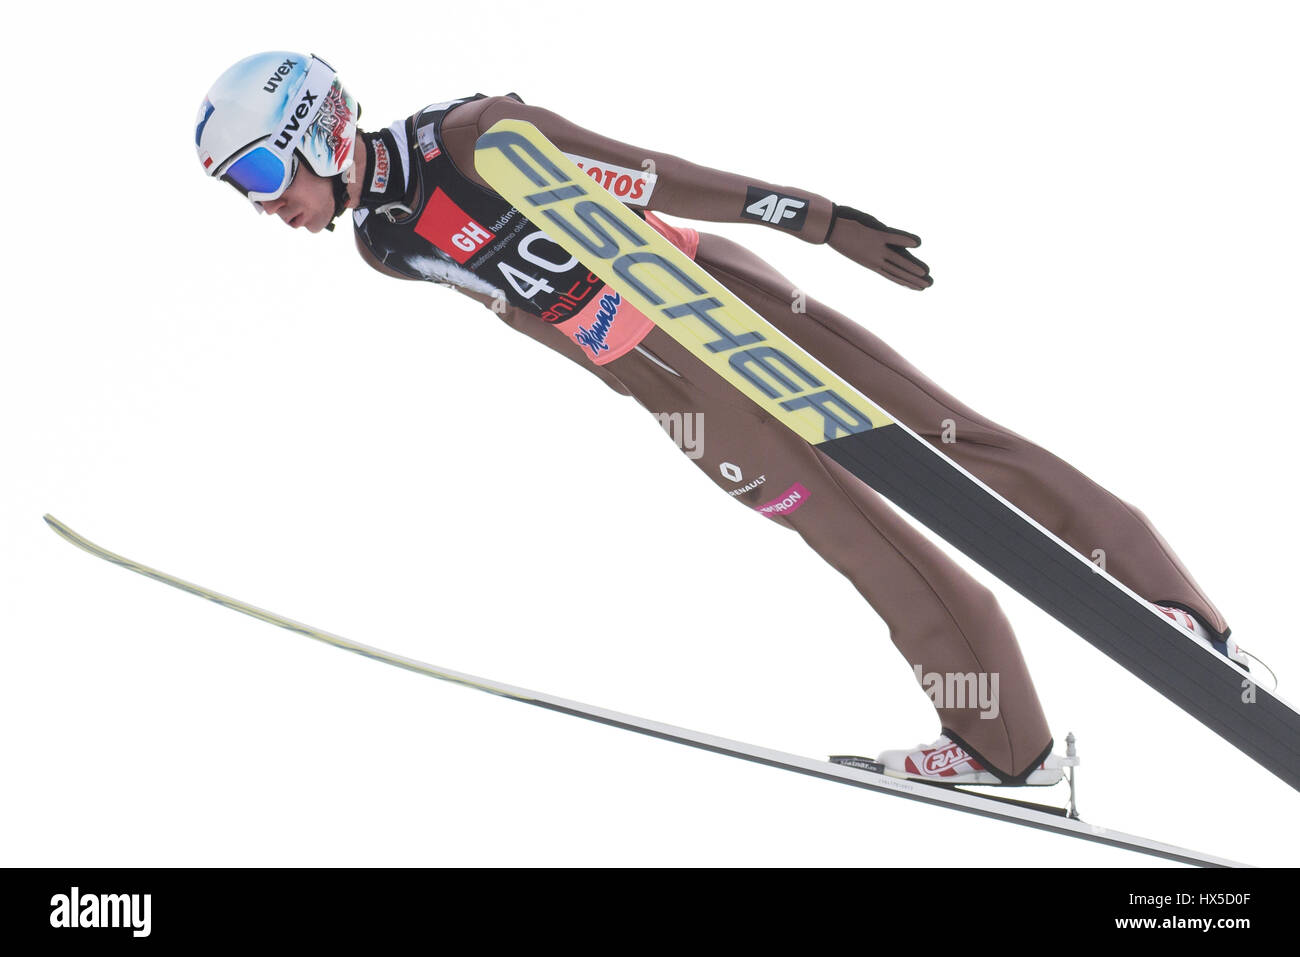 Planica, Slovenia. 24th Mar, 2017. Stoch Kamil of Poland competes during Planica FIS Ski Jumping World Cup finals on March 24, 2017 in Planica, Slovenia Credit: Rok Rakun/Pacific Press/Alamy Live News Stock Photo